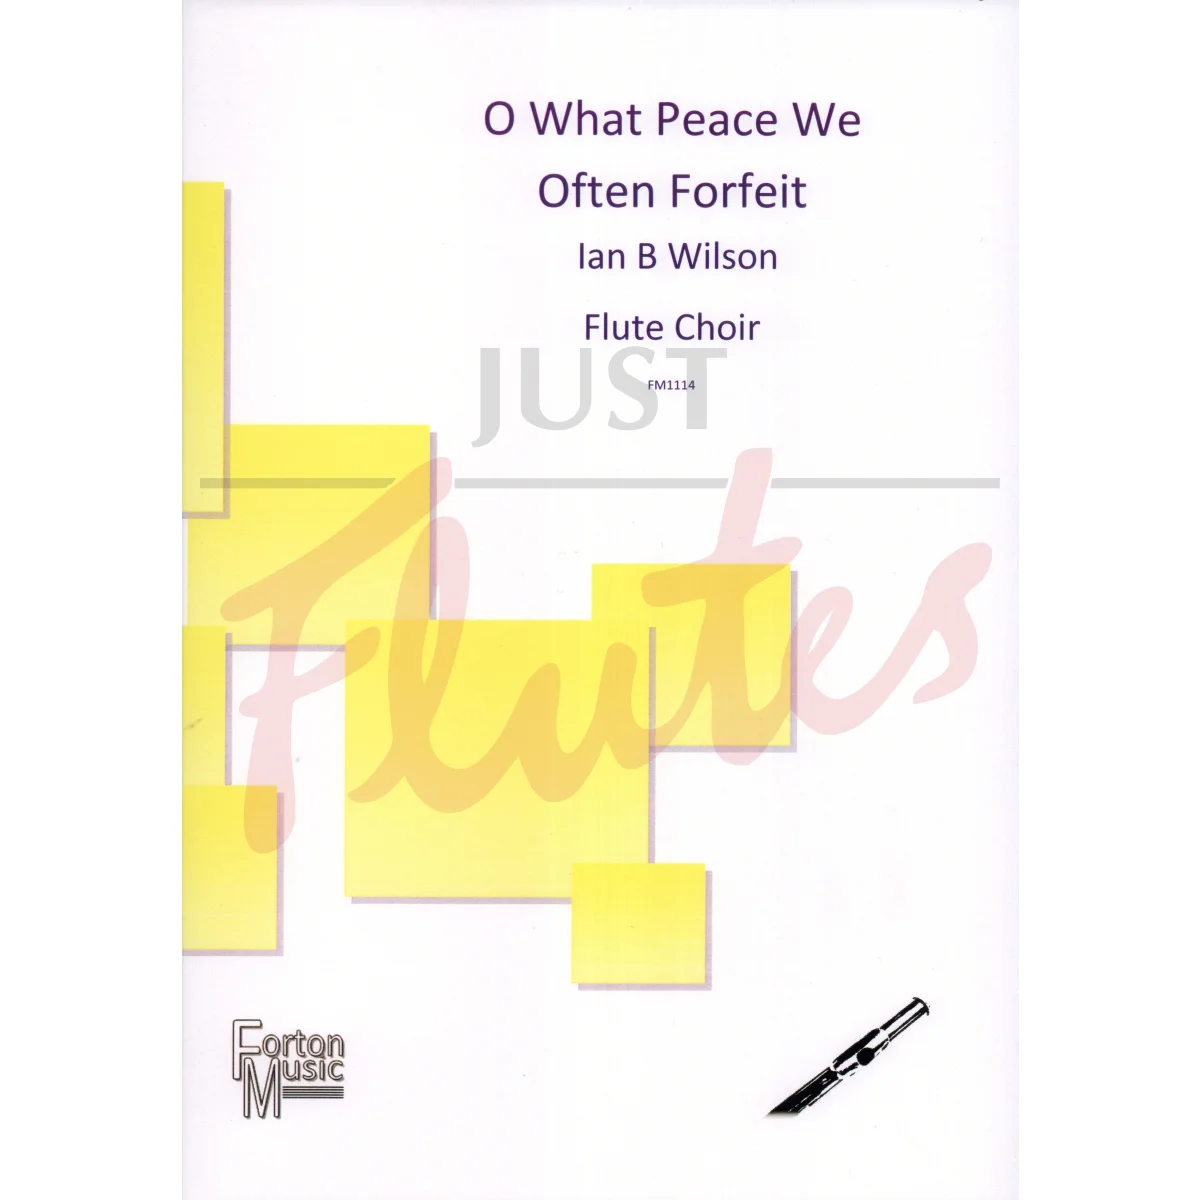 O What Peace We Often Forfeit for Flute Choir